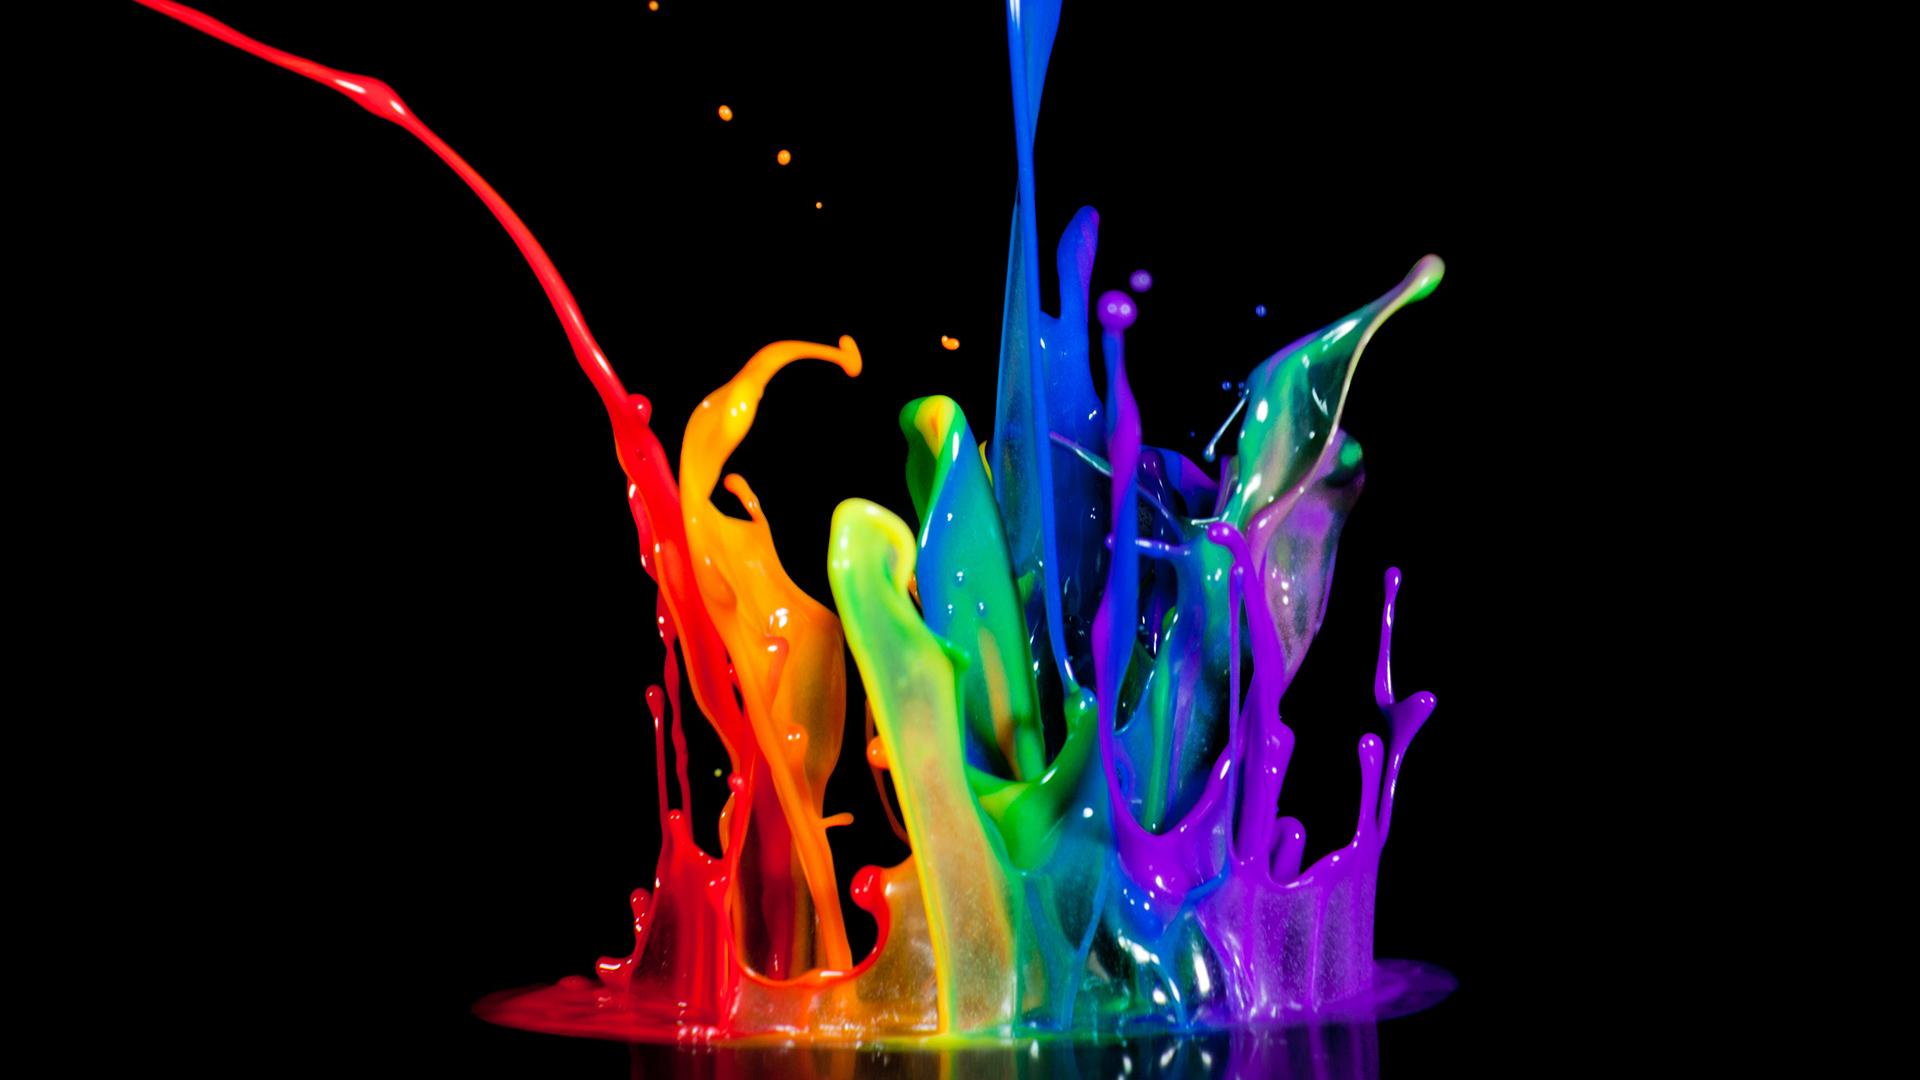 Wallpaper Abstract Colorful Cool Wallpaper55 Best